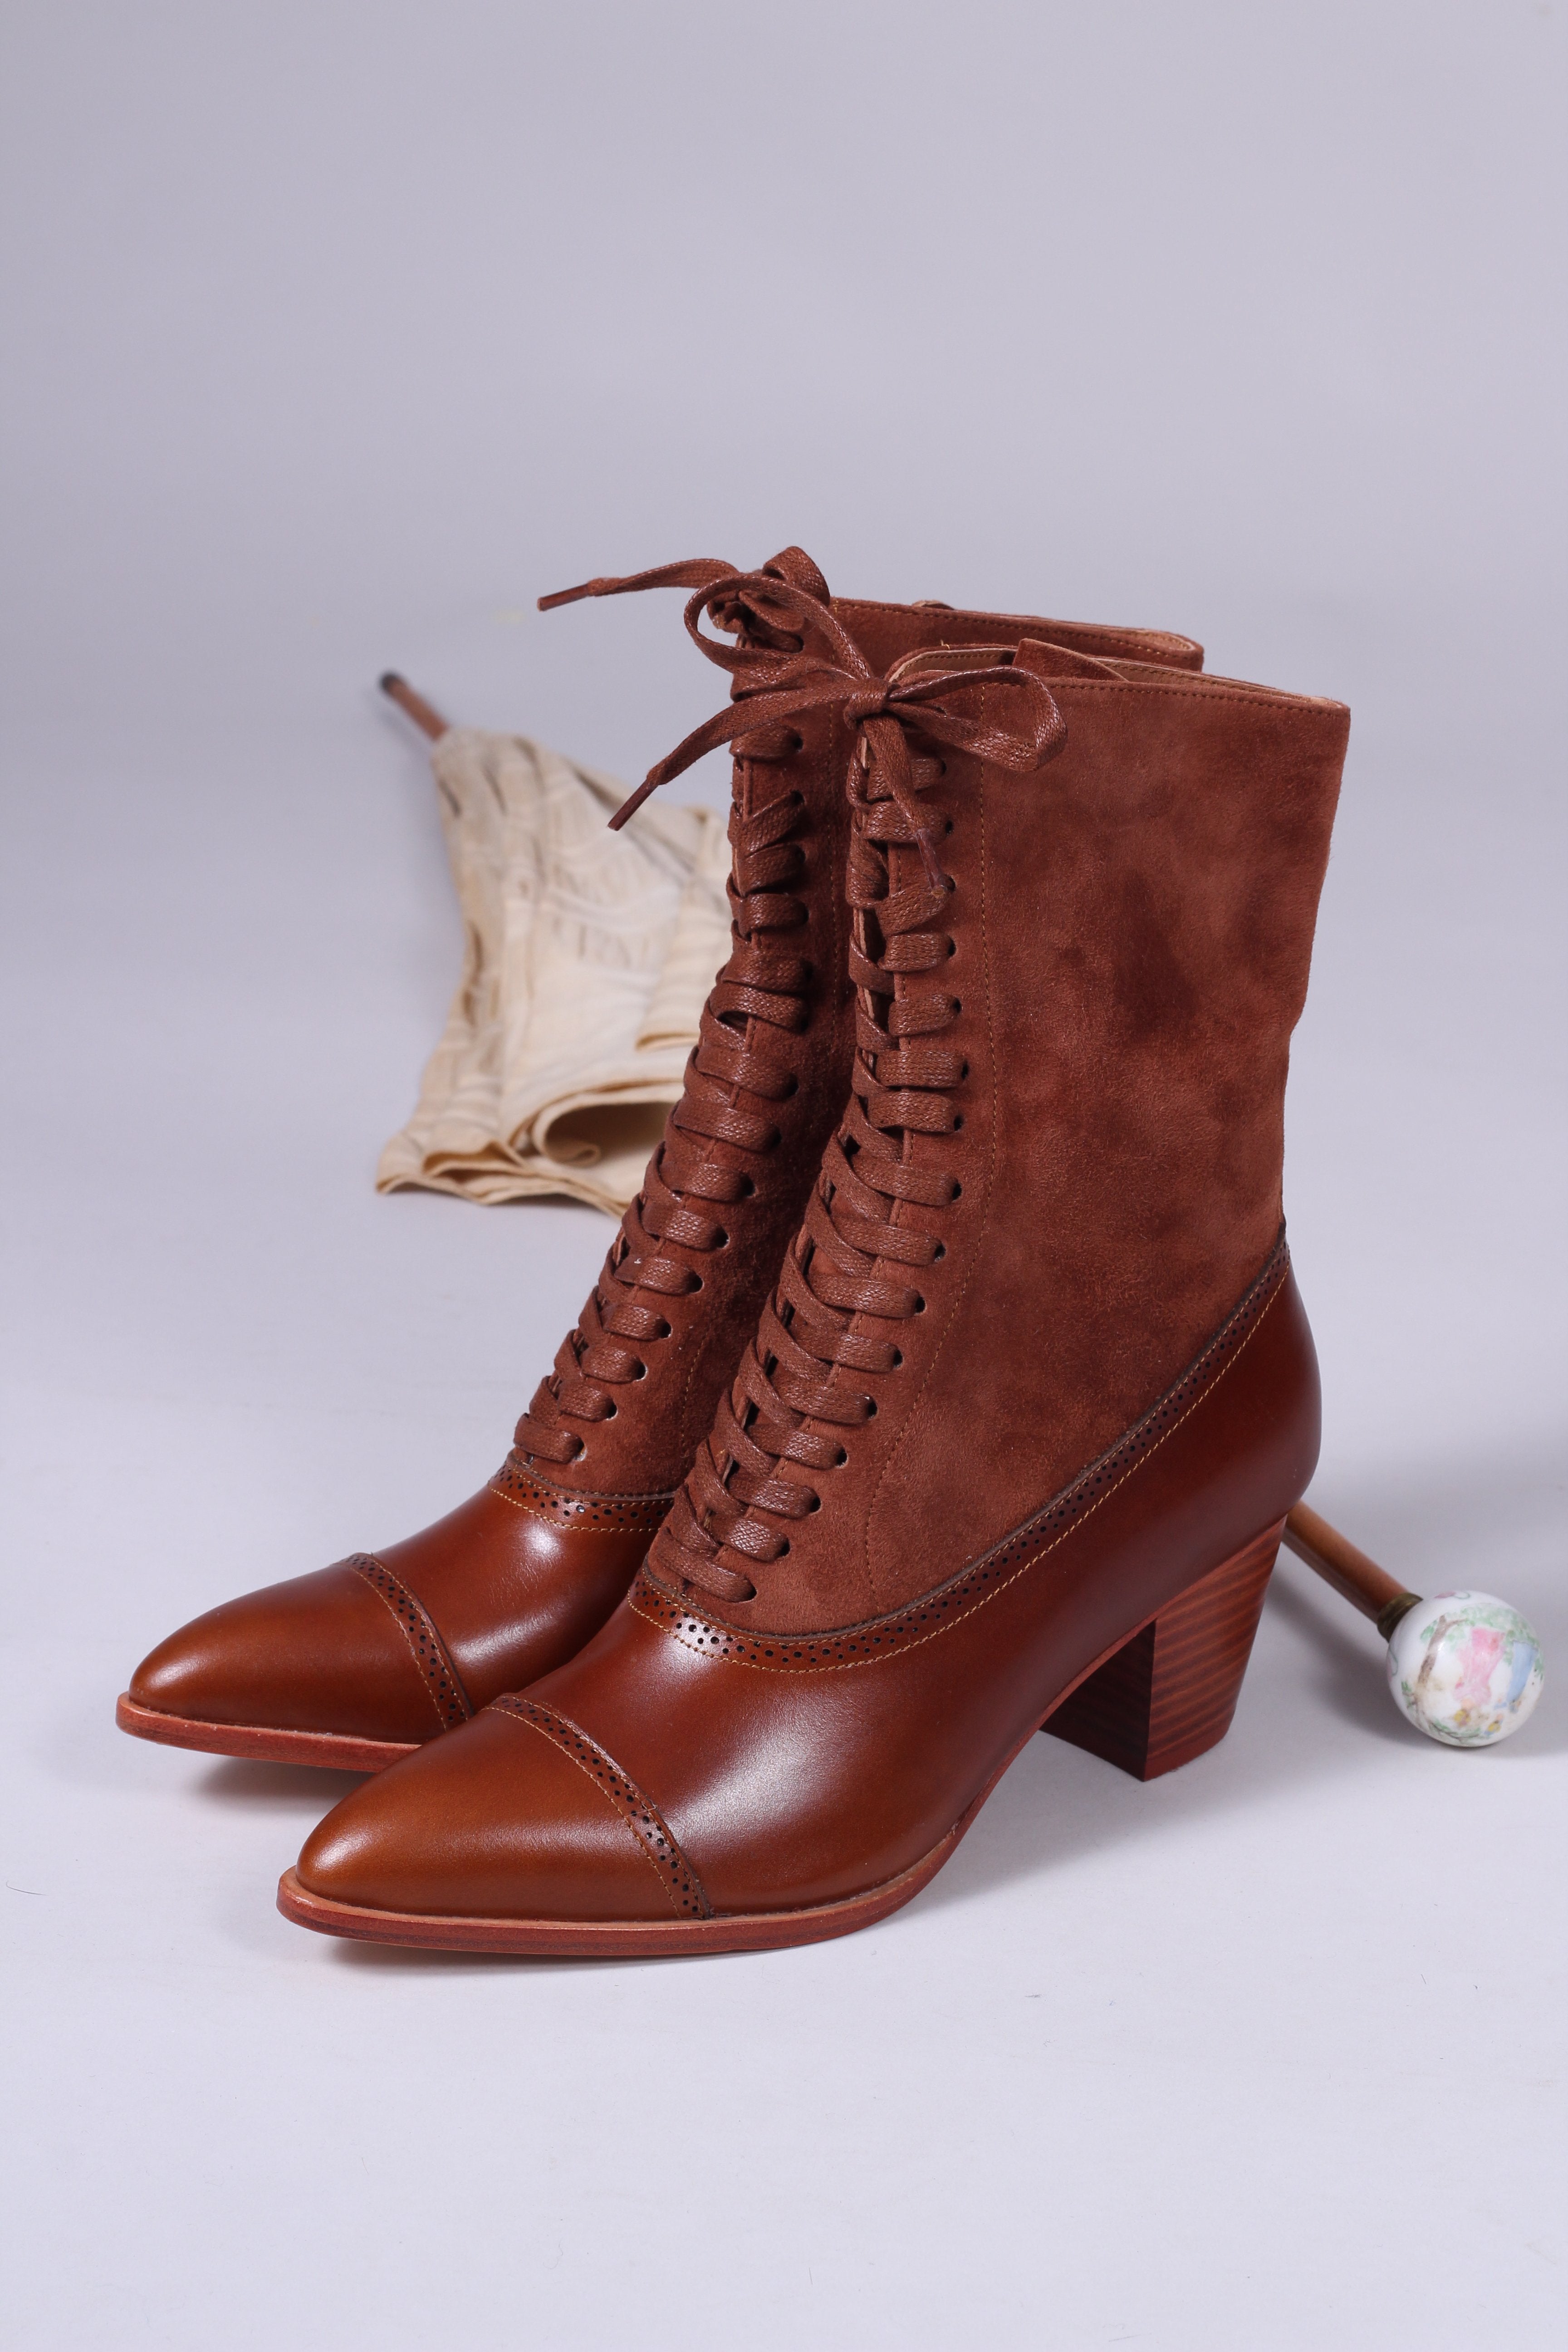 Edwardian style boots, 1900-1910 - brown - Victoria